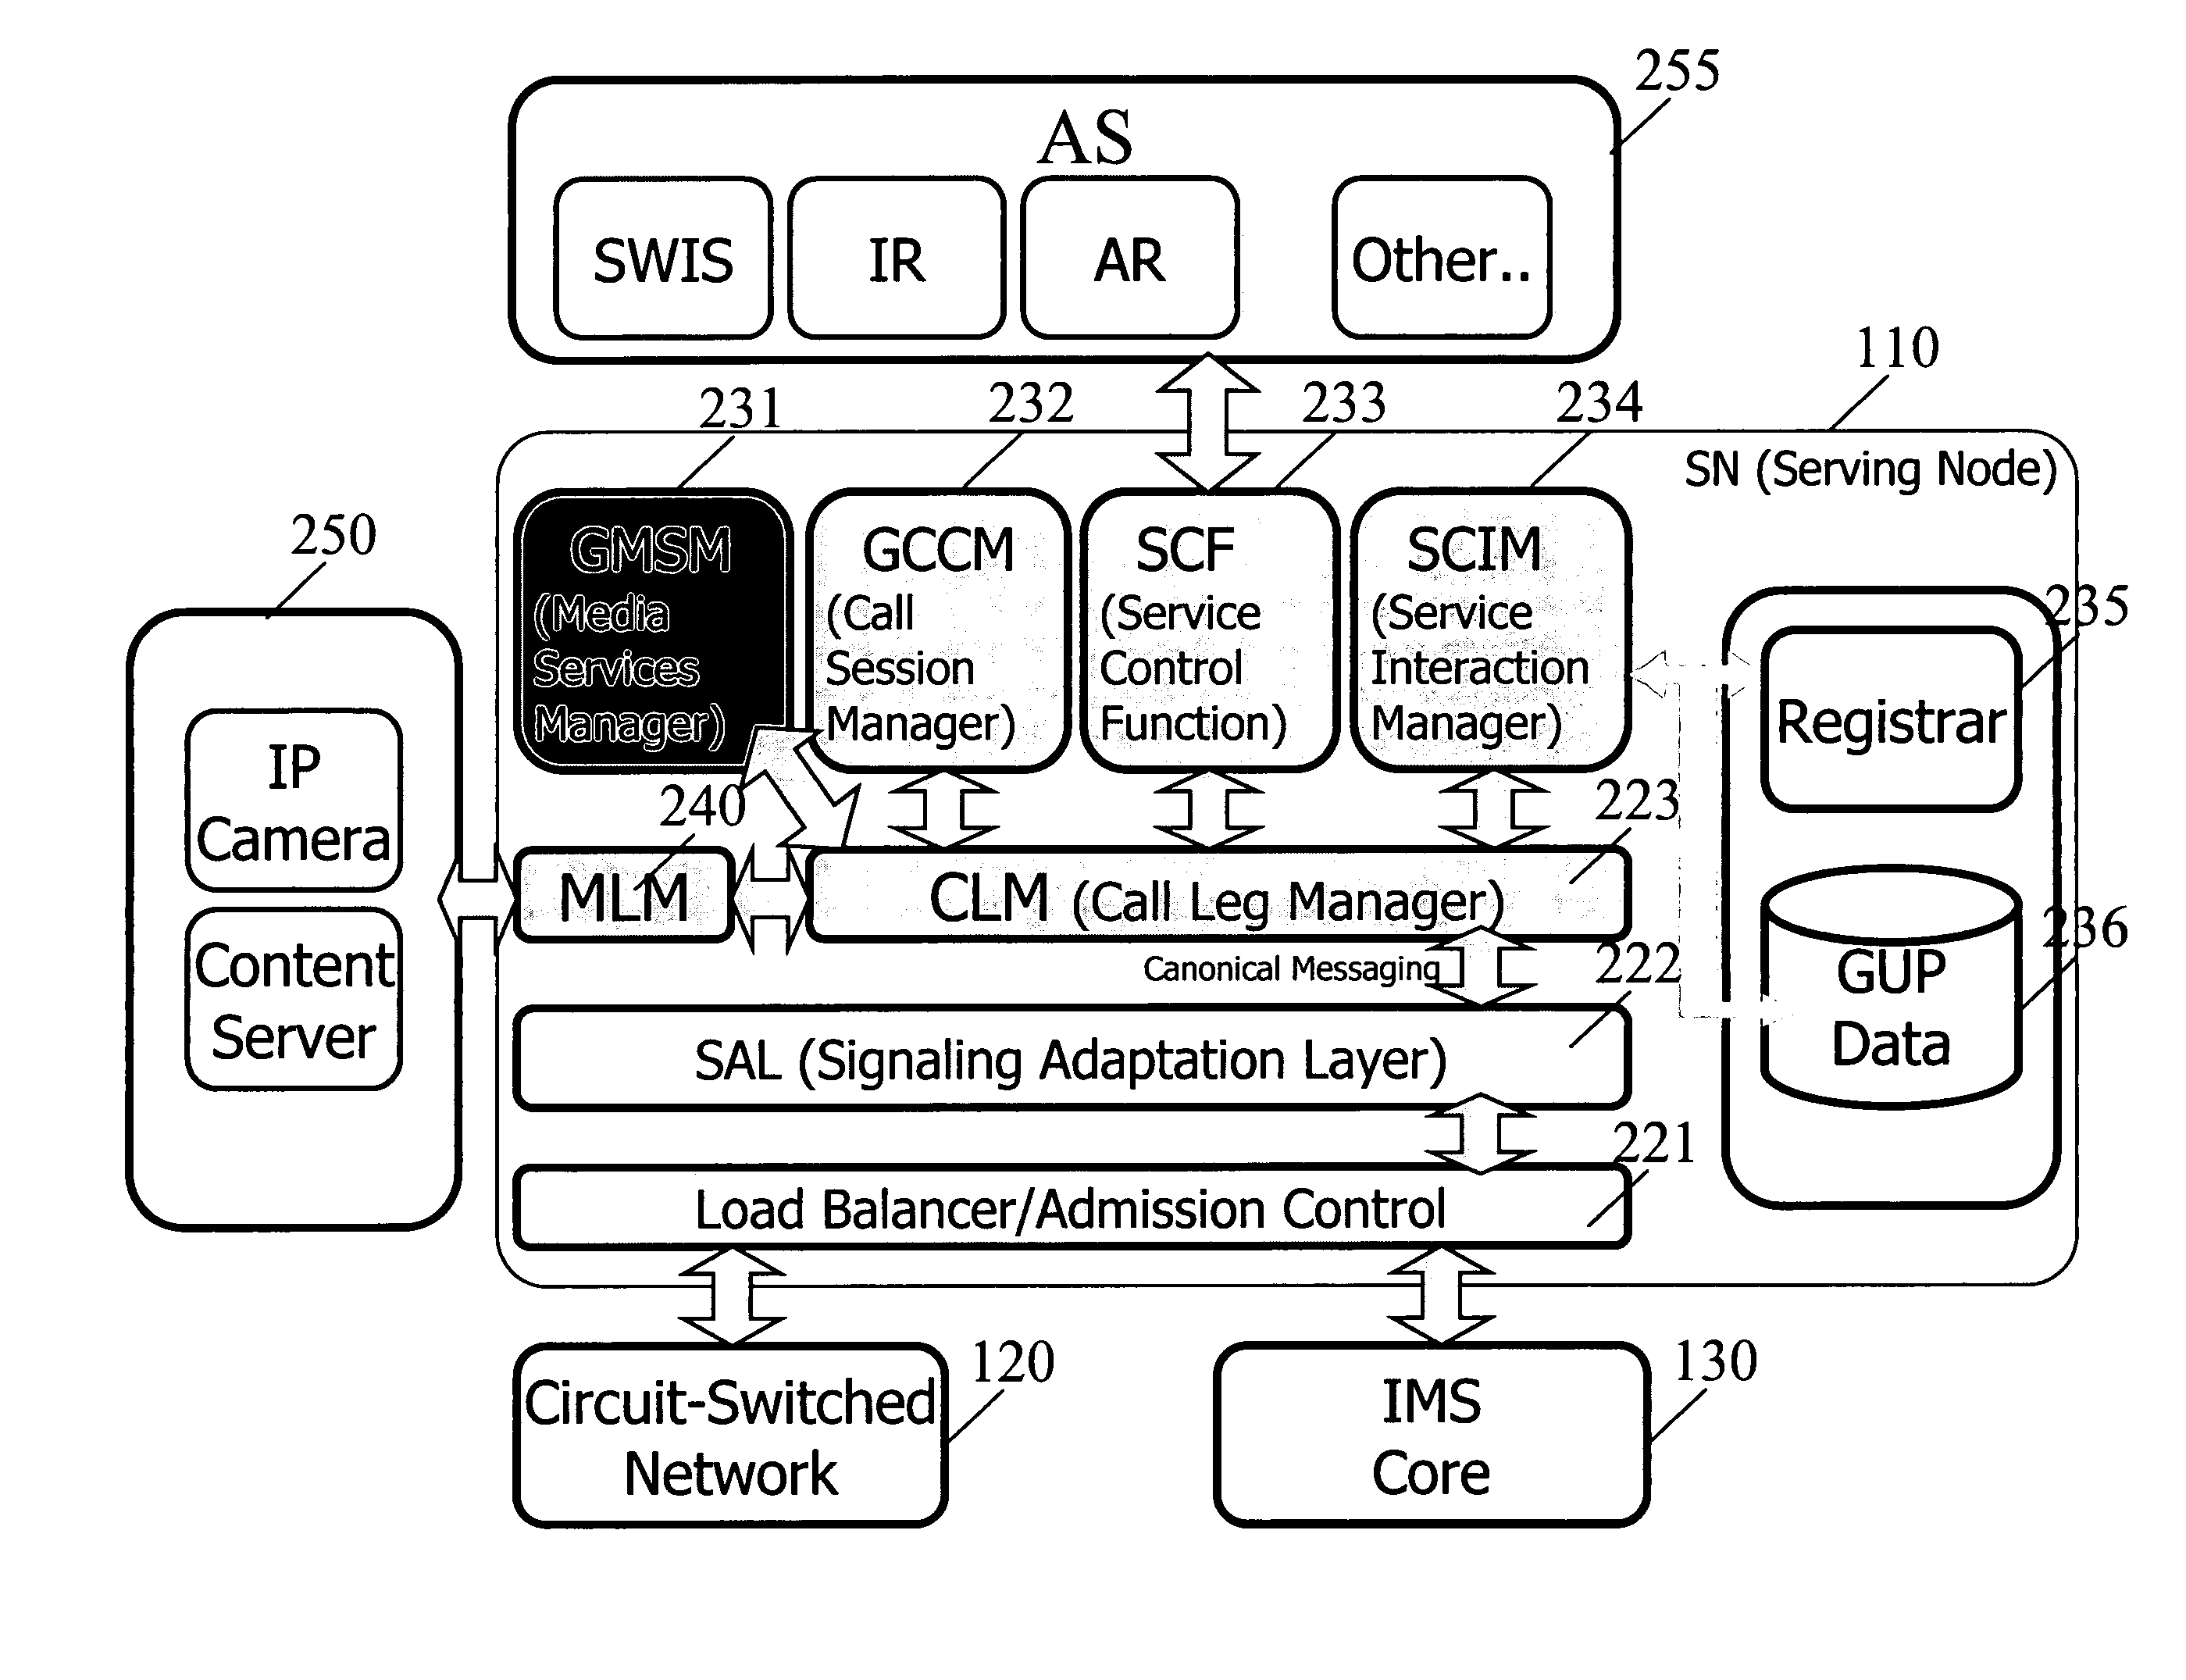 System and method for enabling combinational services in wireless networks by using a service delivery platform